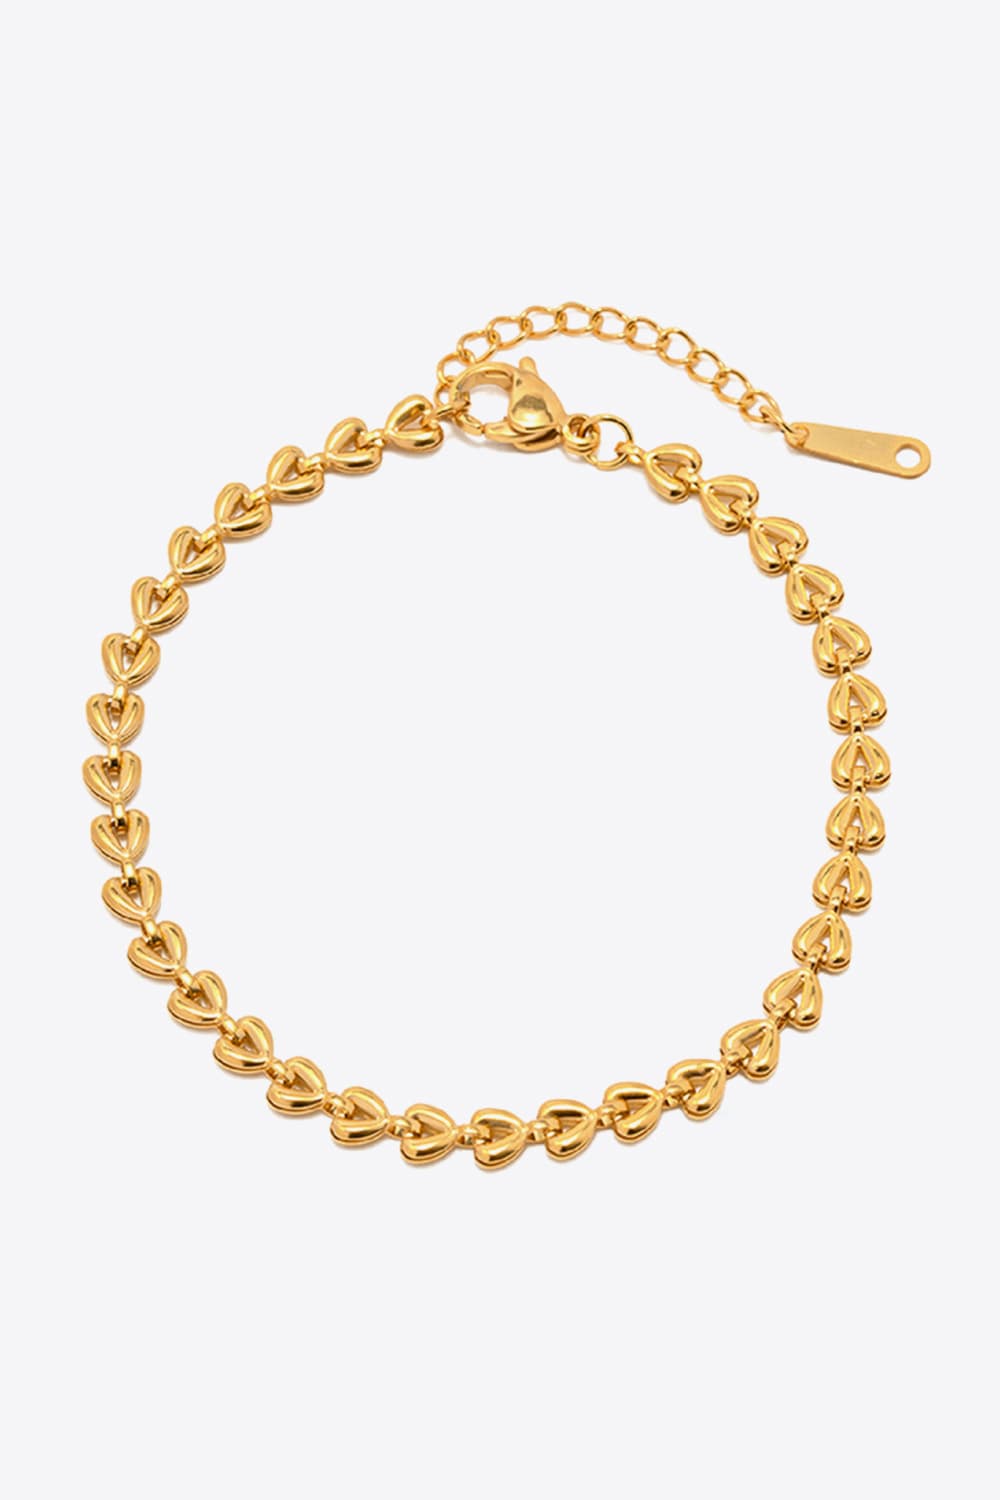 Heart Chain Lobster Clasp Bracelet Gold One Size